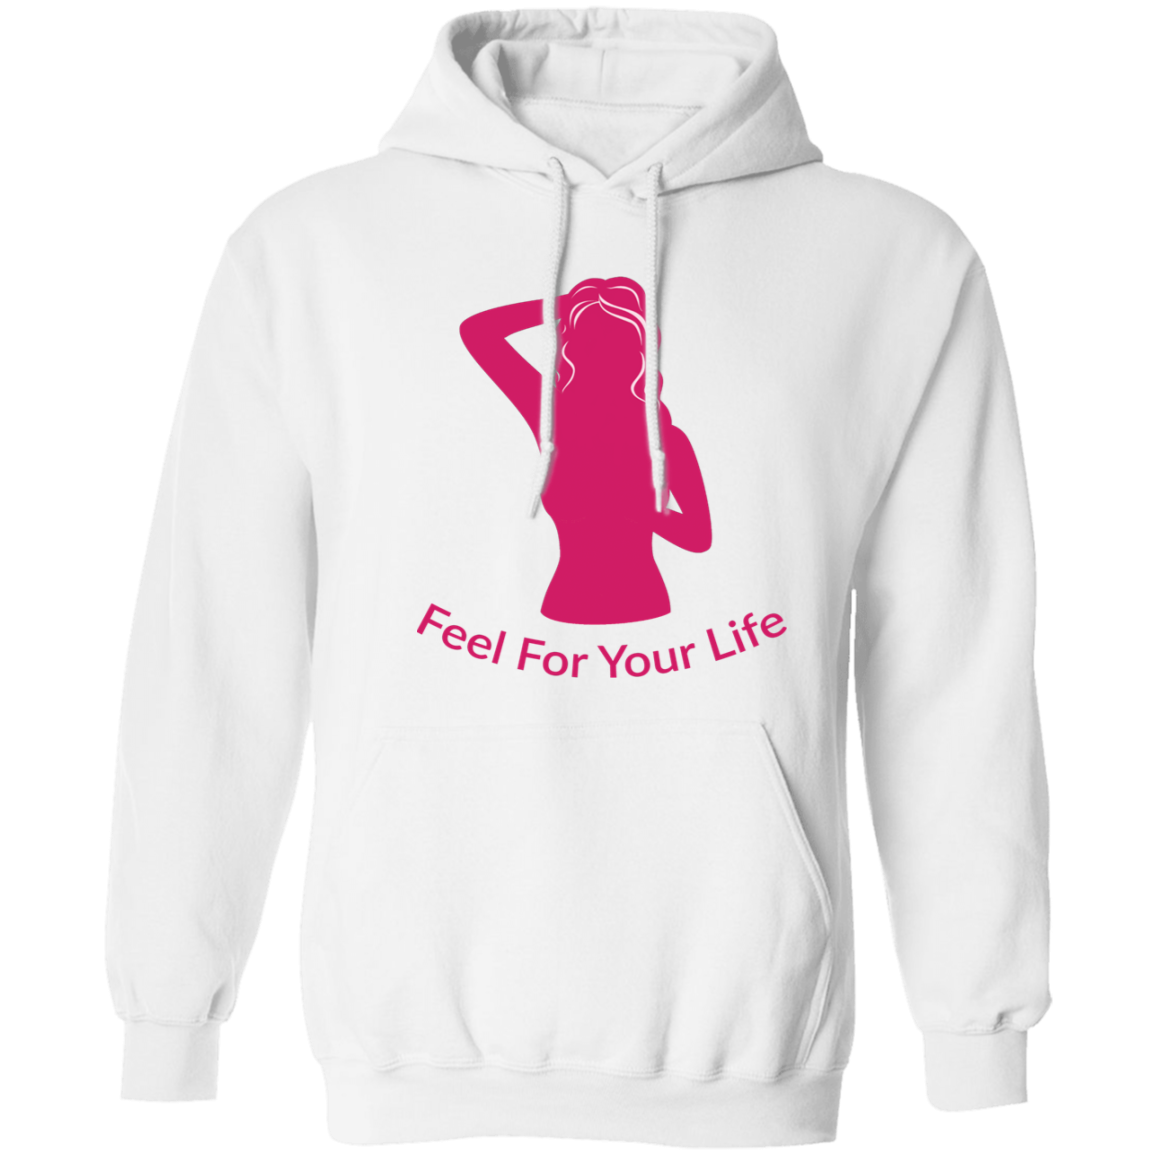 Feel For Your Life Unisex Hoodie White w/ Hot Pink Logo Large